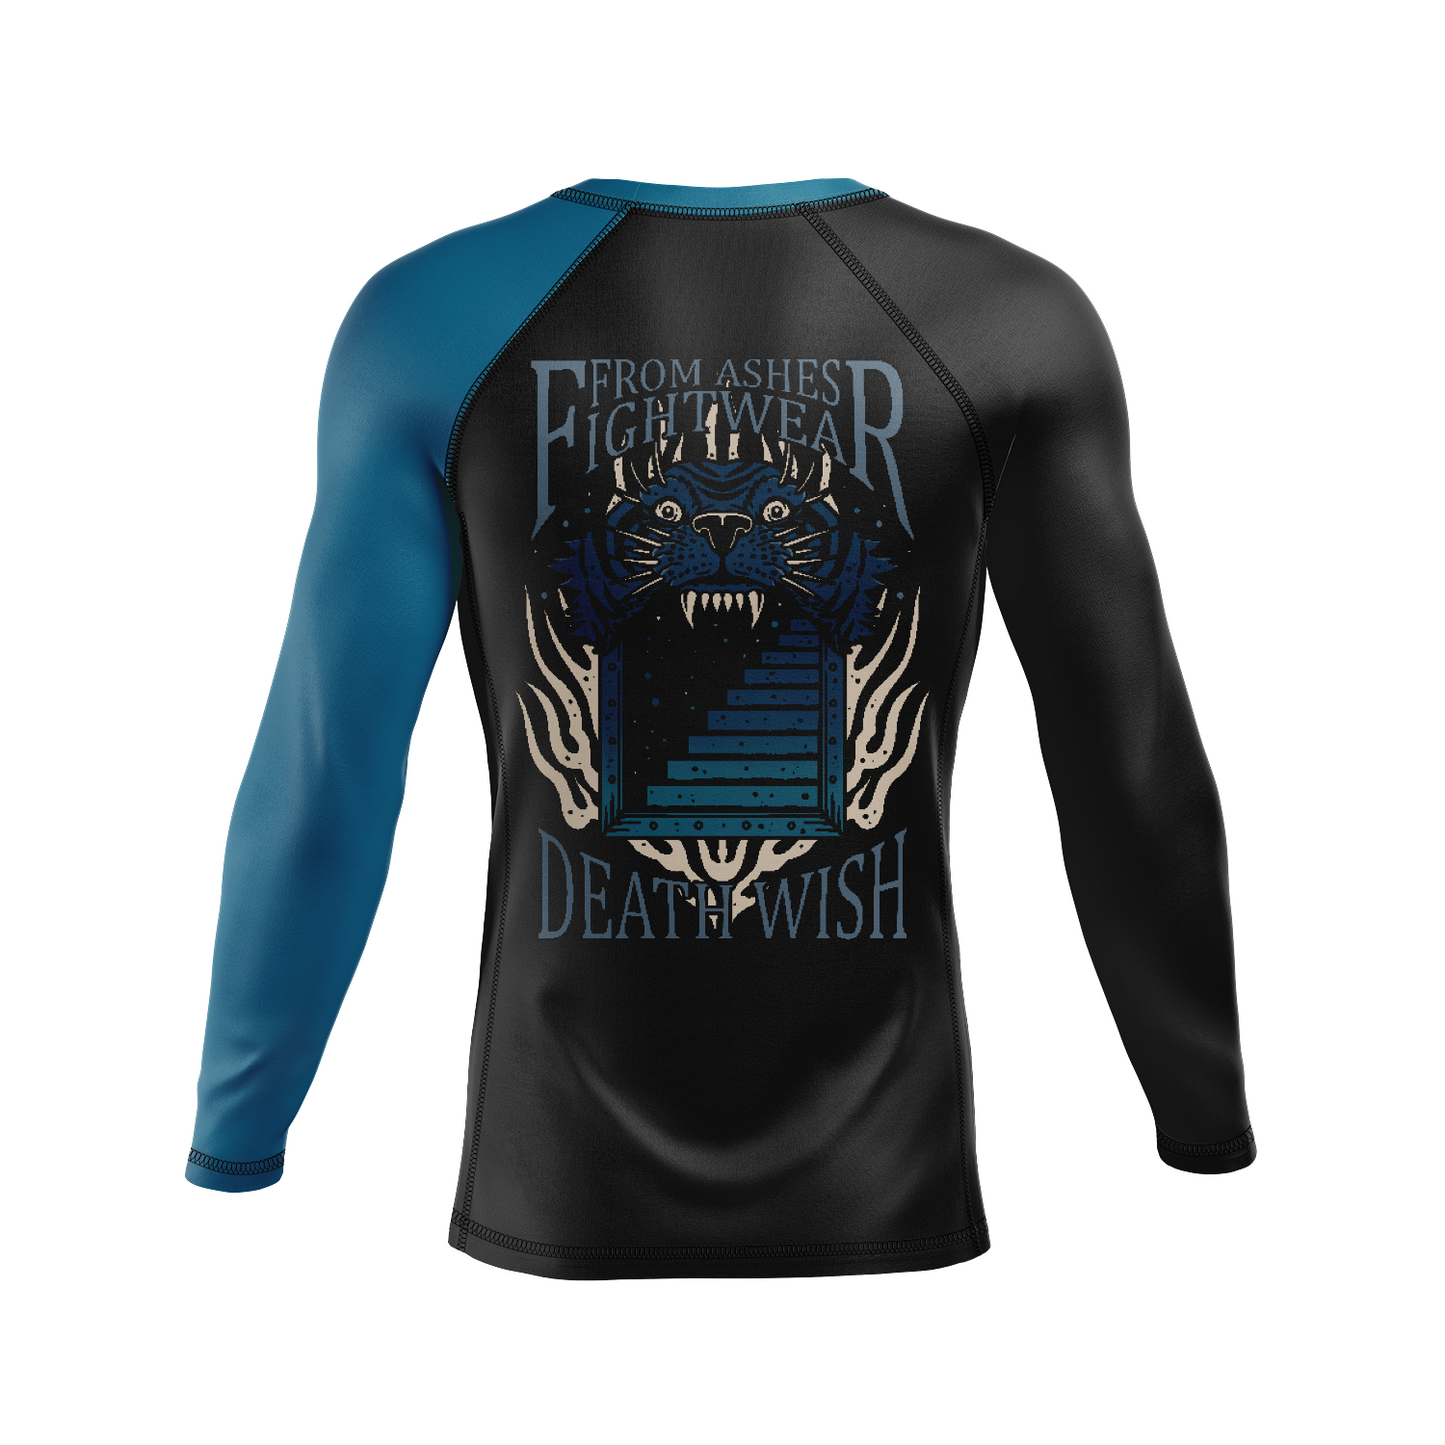 From Ashes Fightwear men's rash guard Death Wish Ranked, black and blue